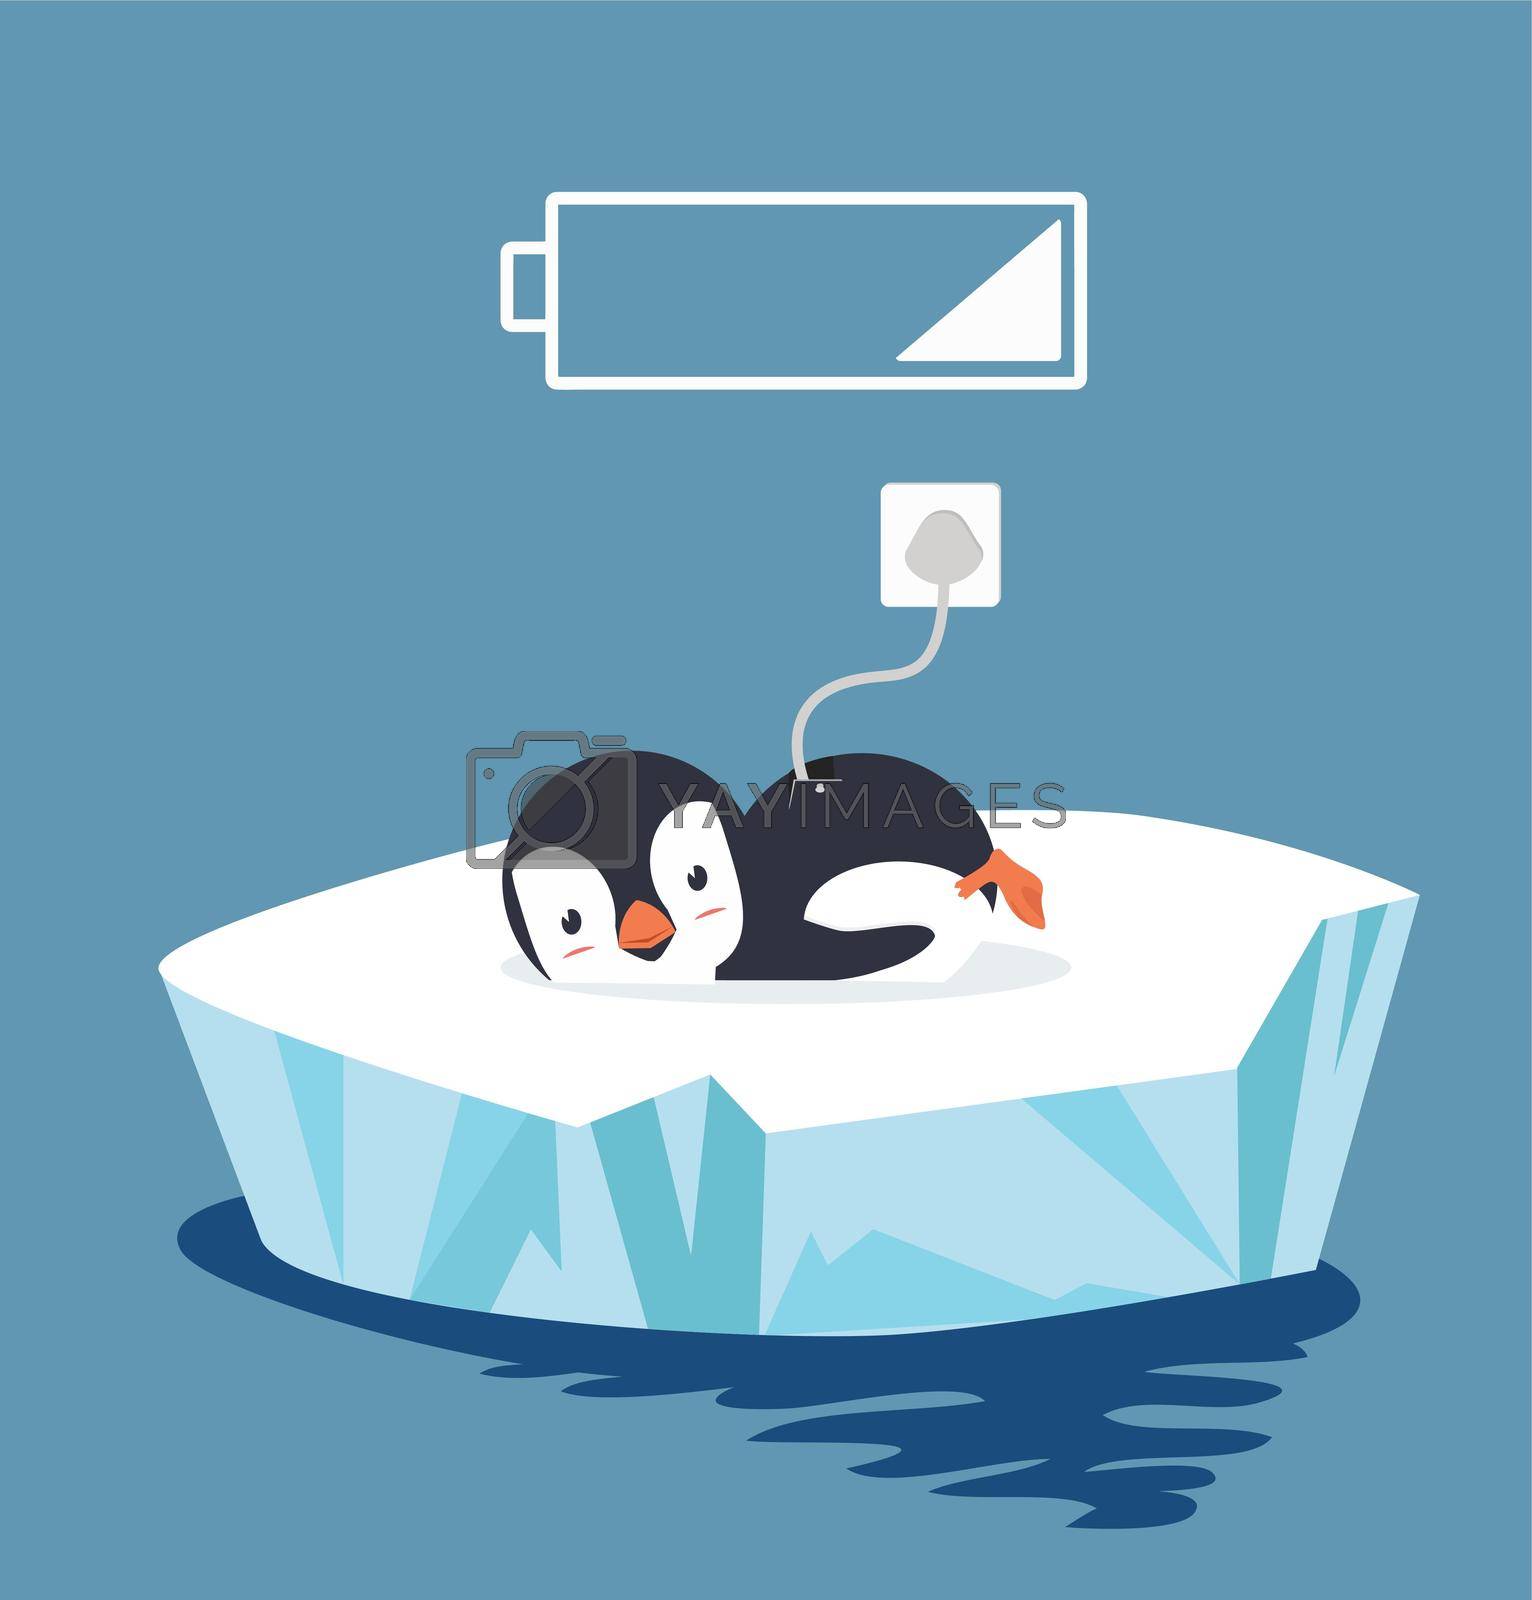 Royalty free image of penguin  tired with battery by focus_bell